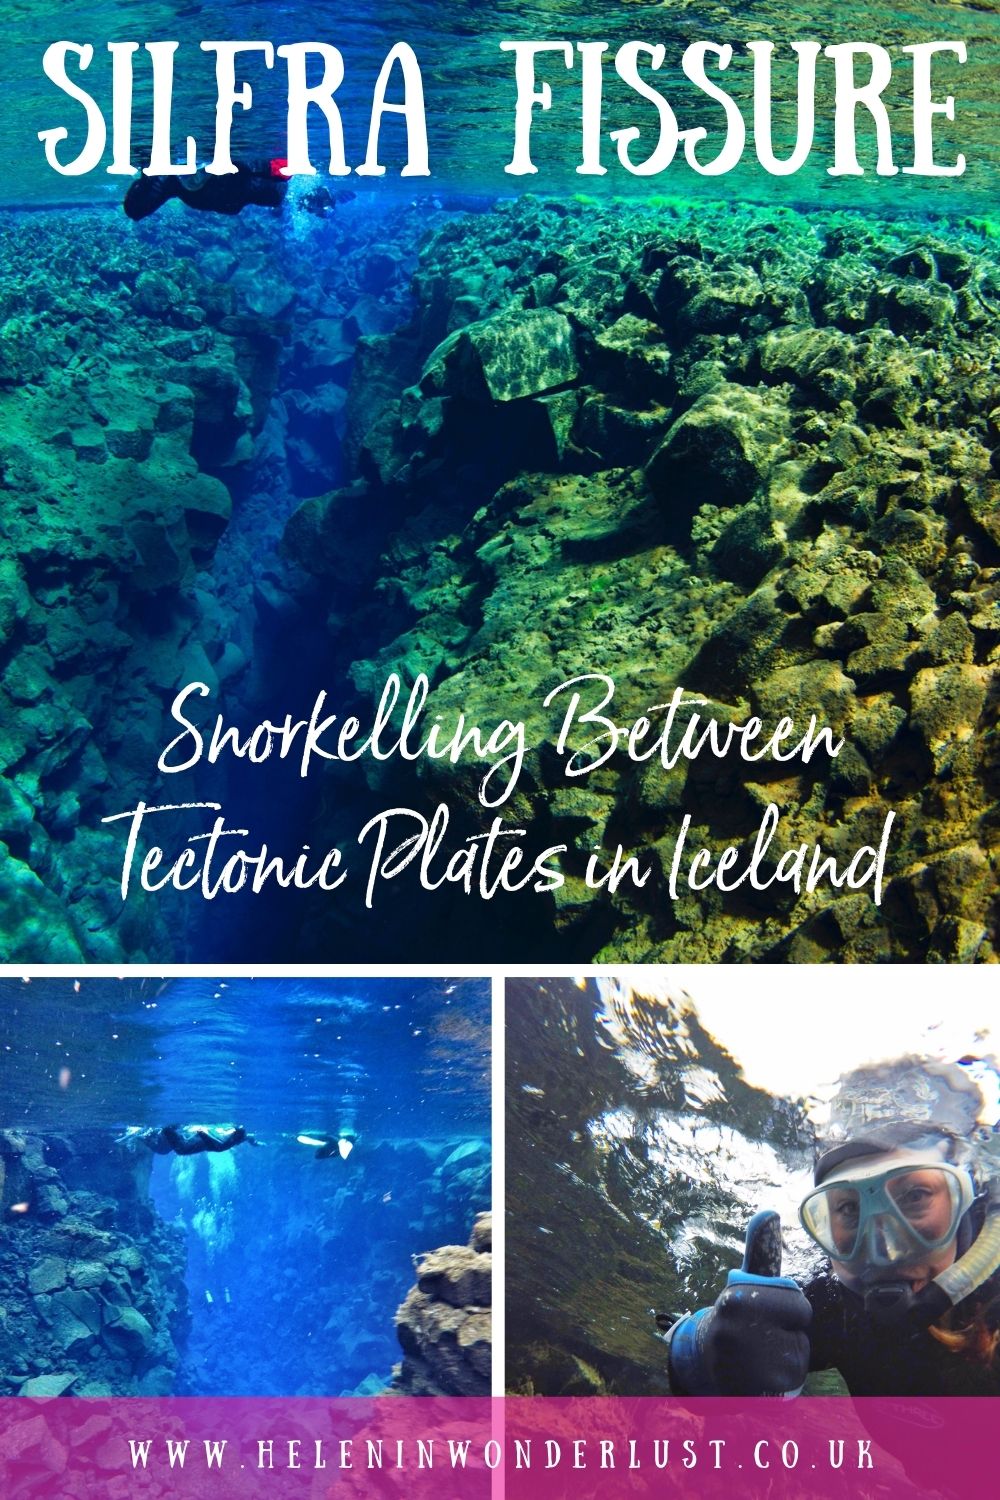 The Silfra Fissure – Snorkelling Between Tectonic Plates in Iceland